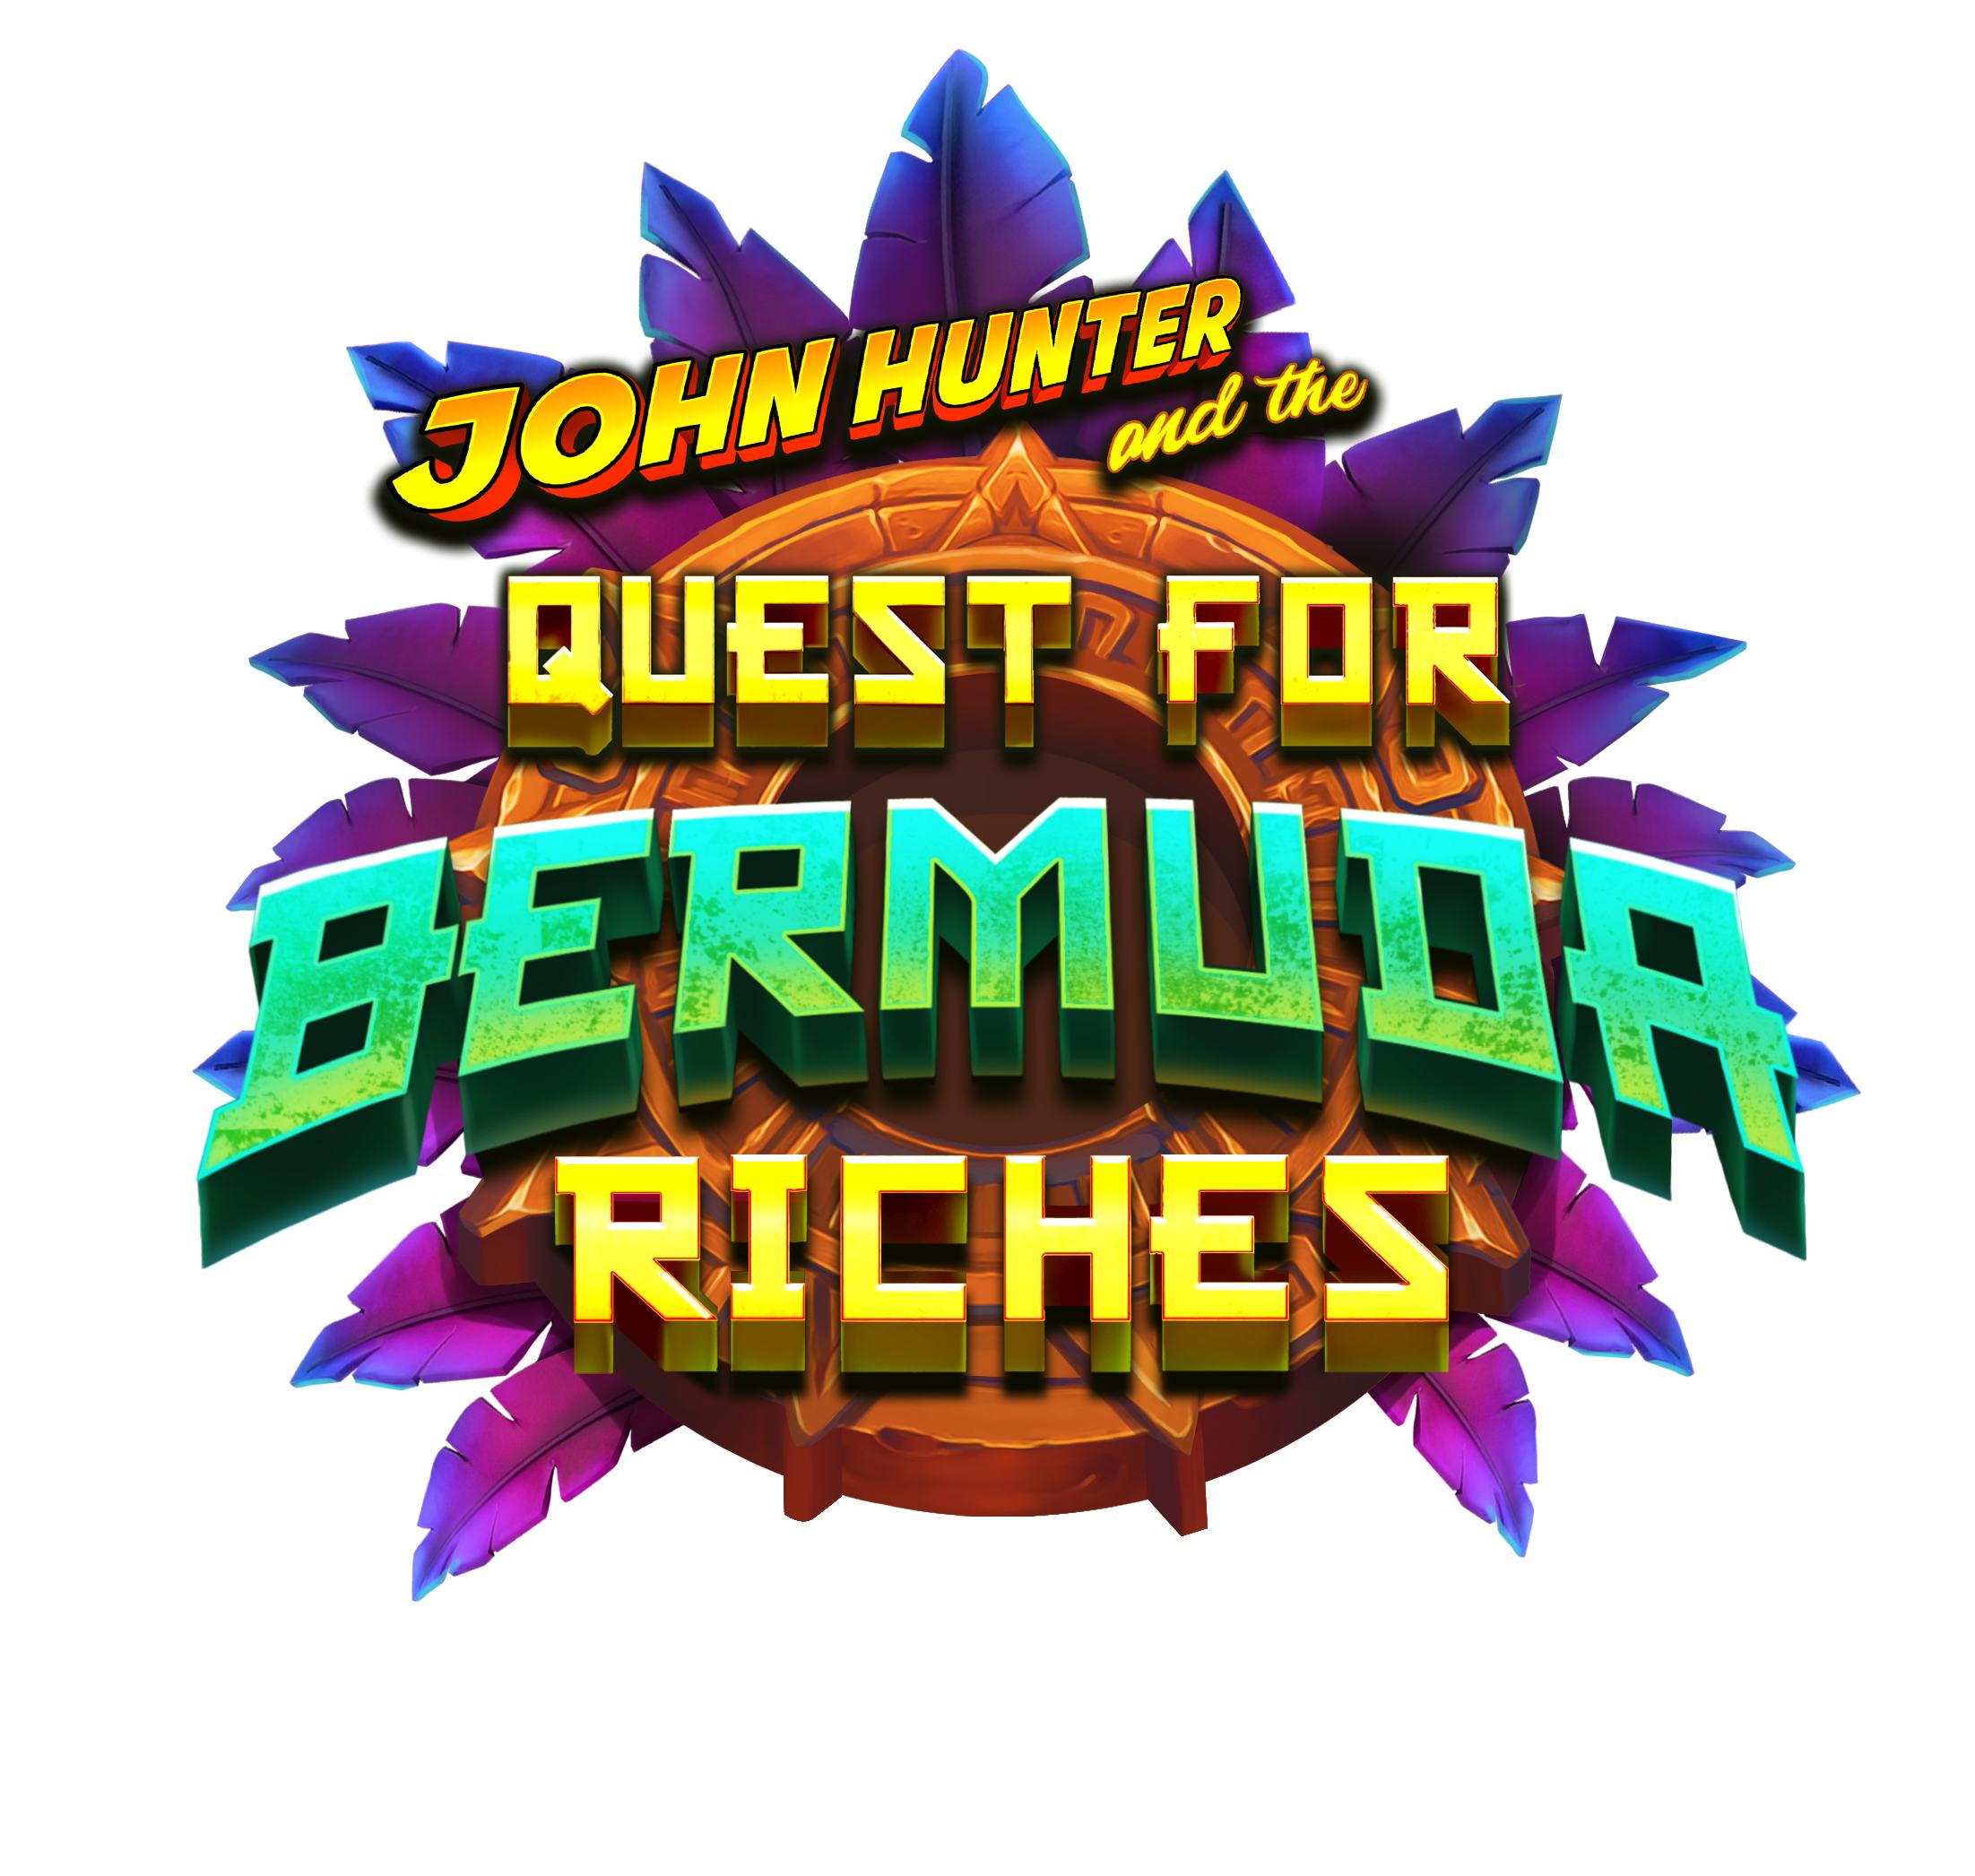 JOHN HUNTER AND THE QUEST FOR BERMUDA RICHES